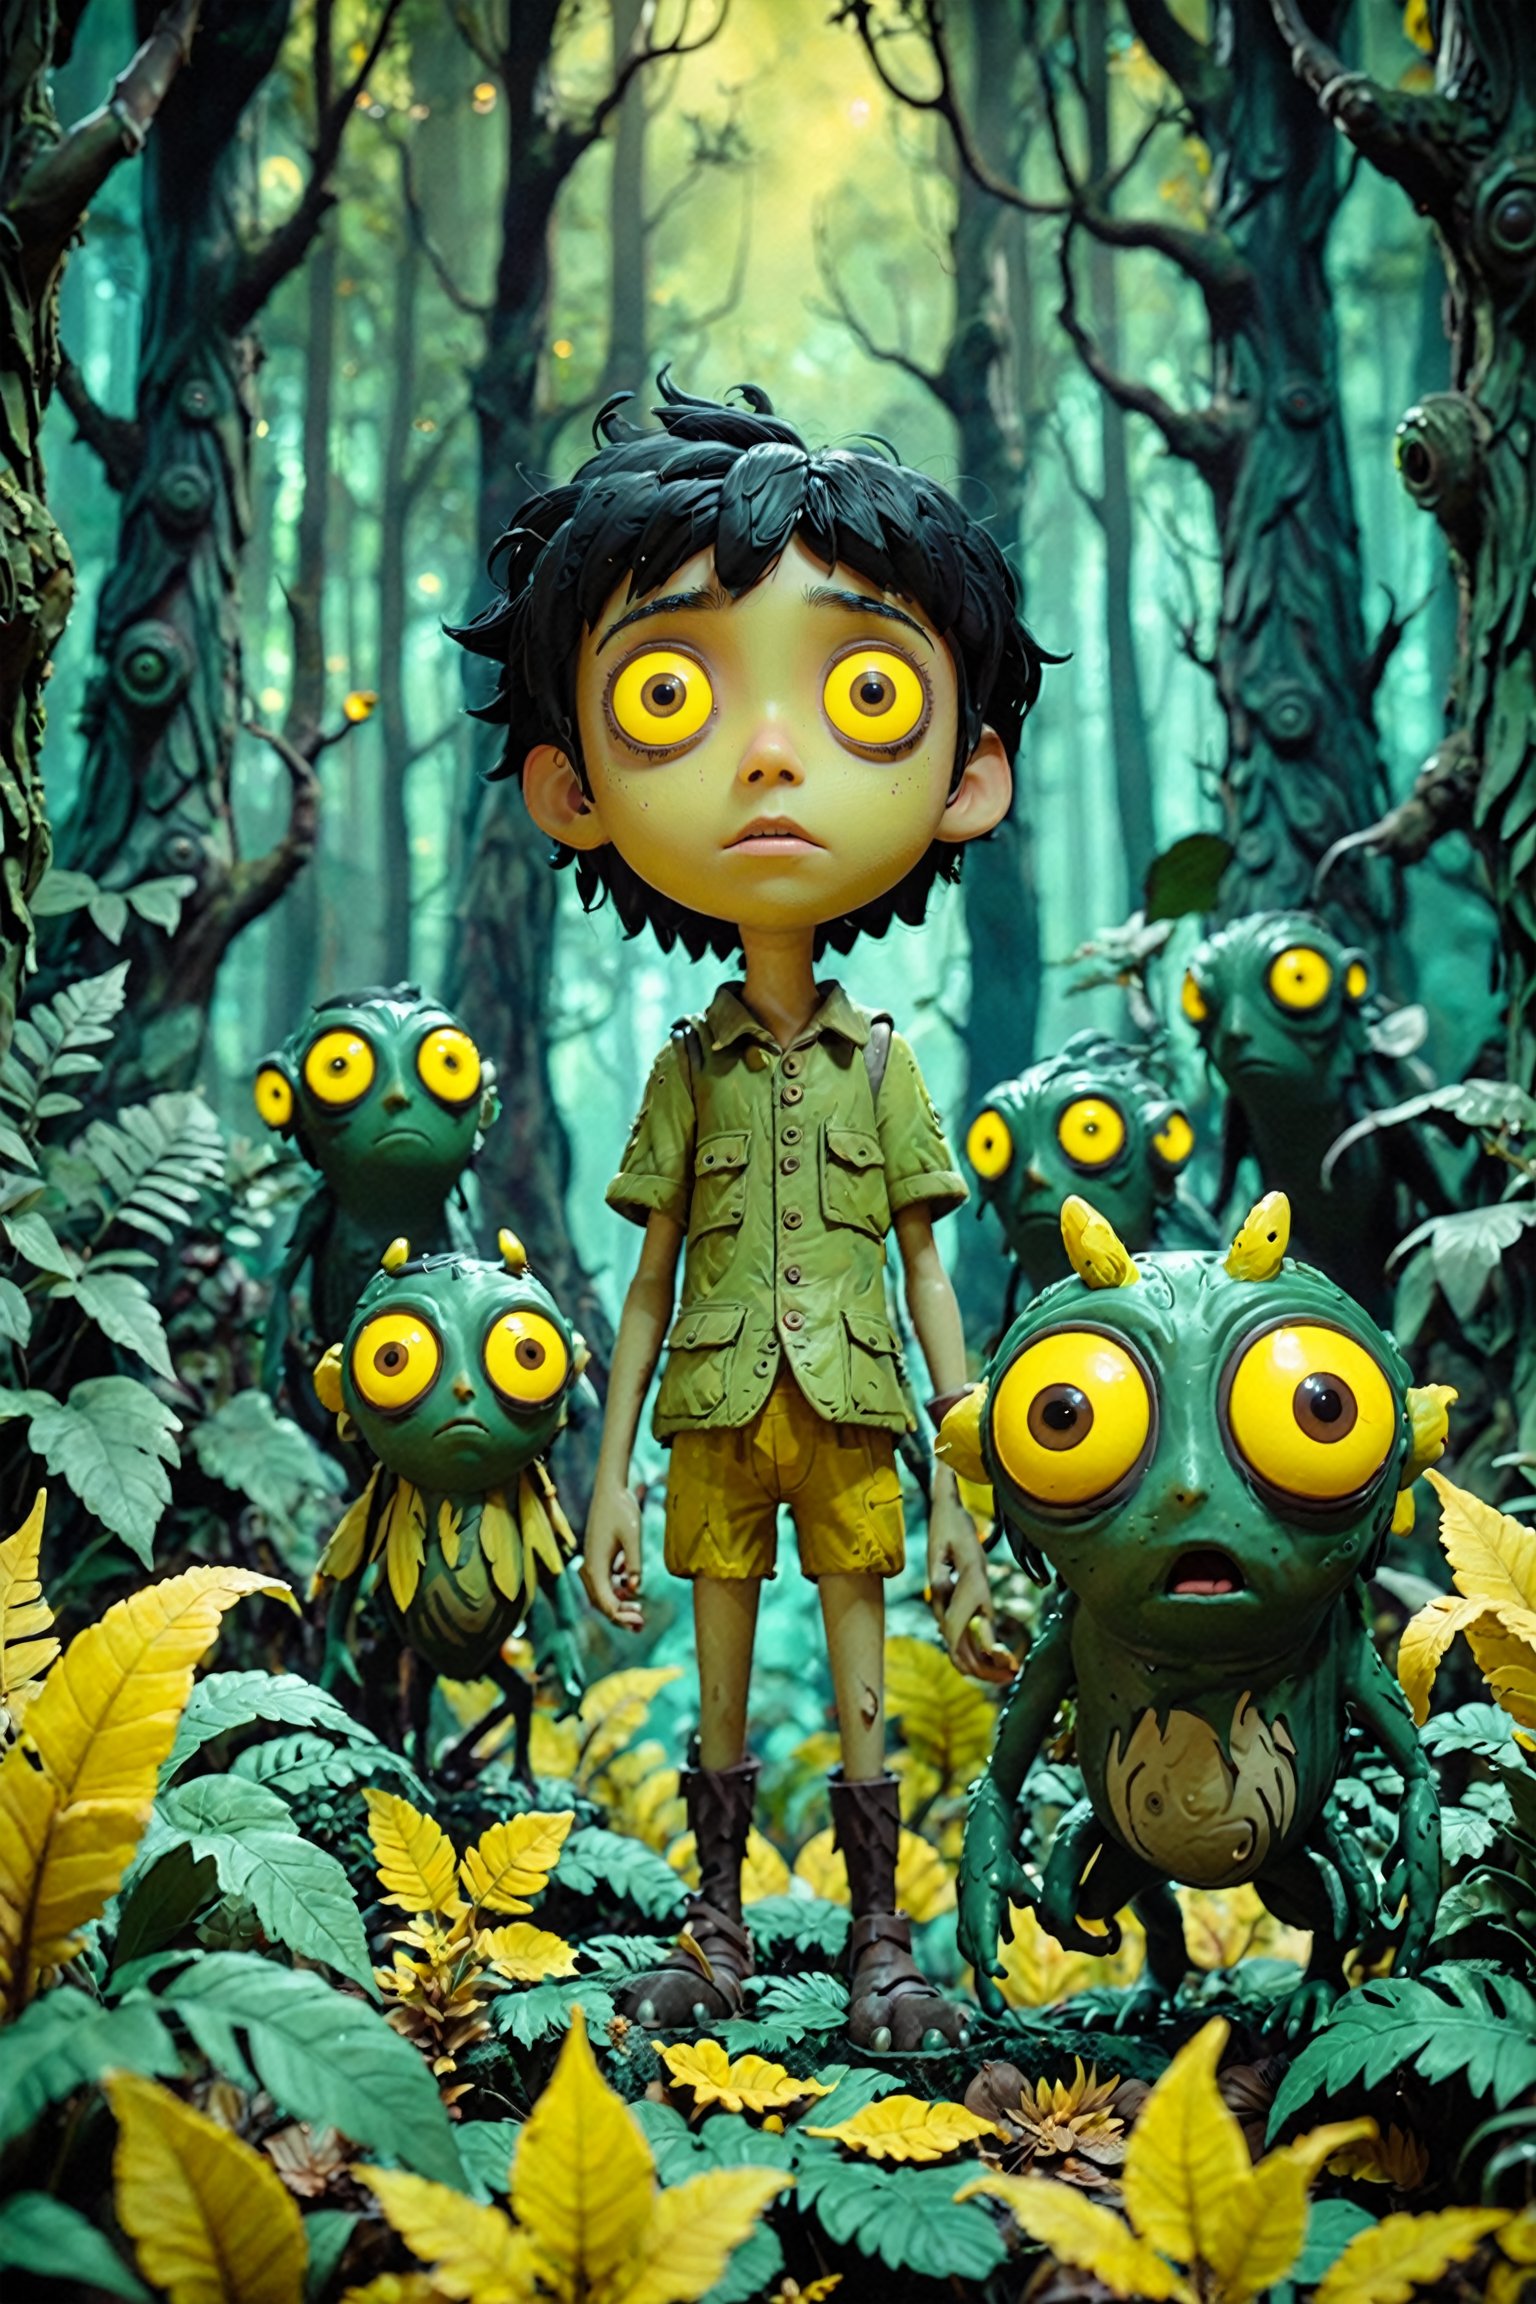 A young animated character with black hair and yellow eyes, standing amidst a forest-like setting. Surrounding the character are various fantastical creatures with large, bulging eyes and menacing expressions. These creatures have a greenish hue and appear to be made of a gelatinous or slimy material. The forest backdrop is filled with foliage, and the overall ambiance is eerie and mysterious.